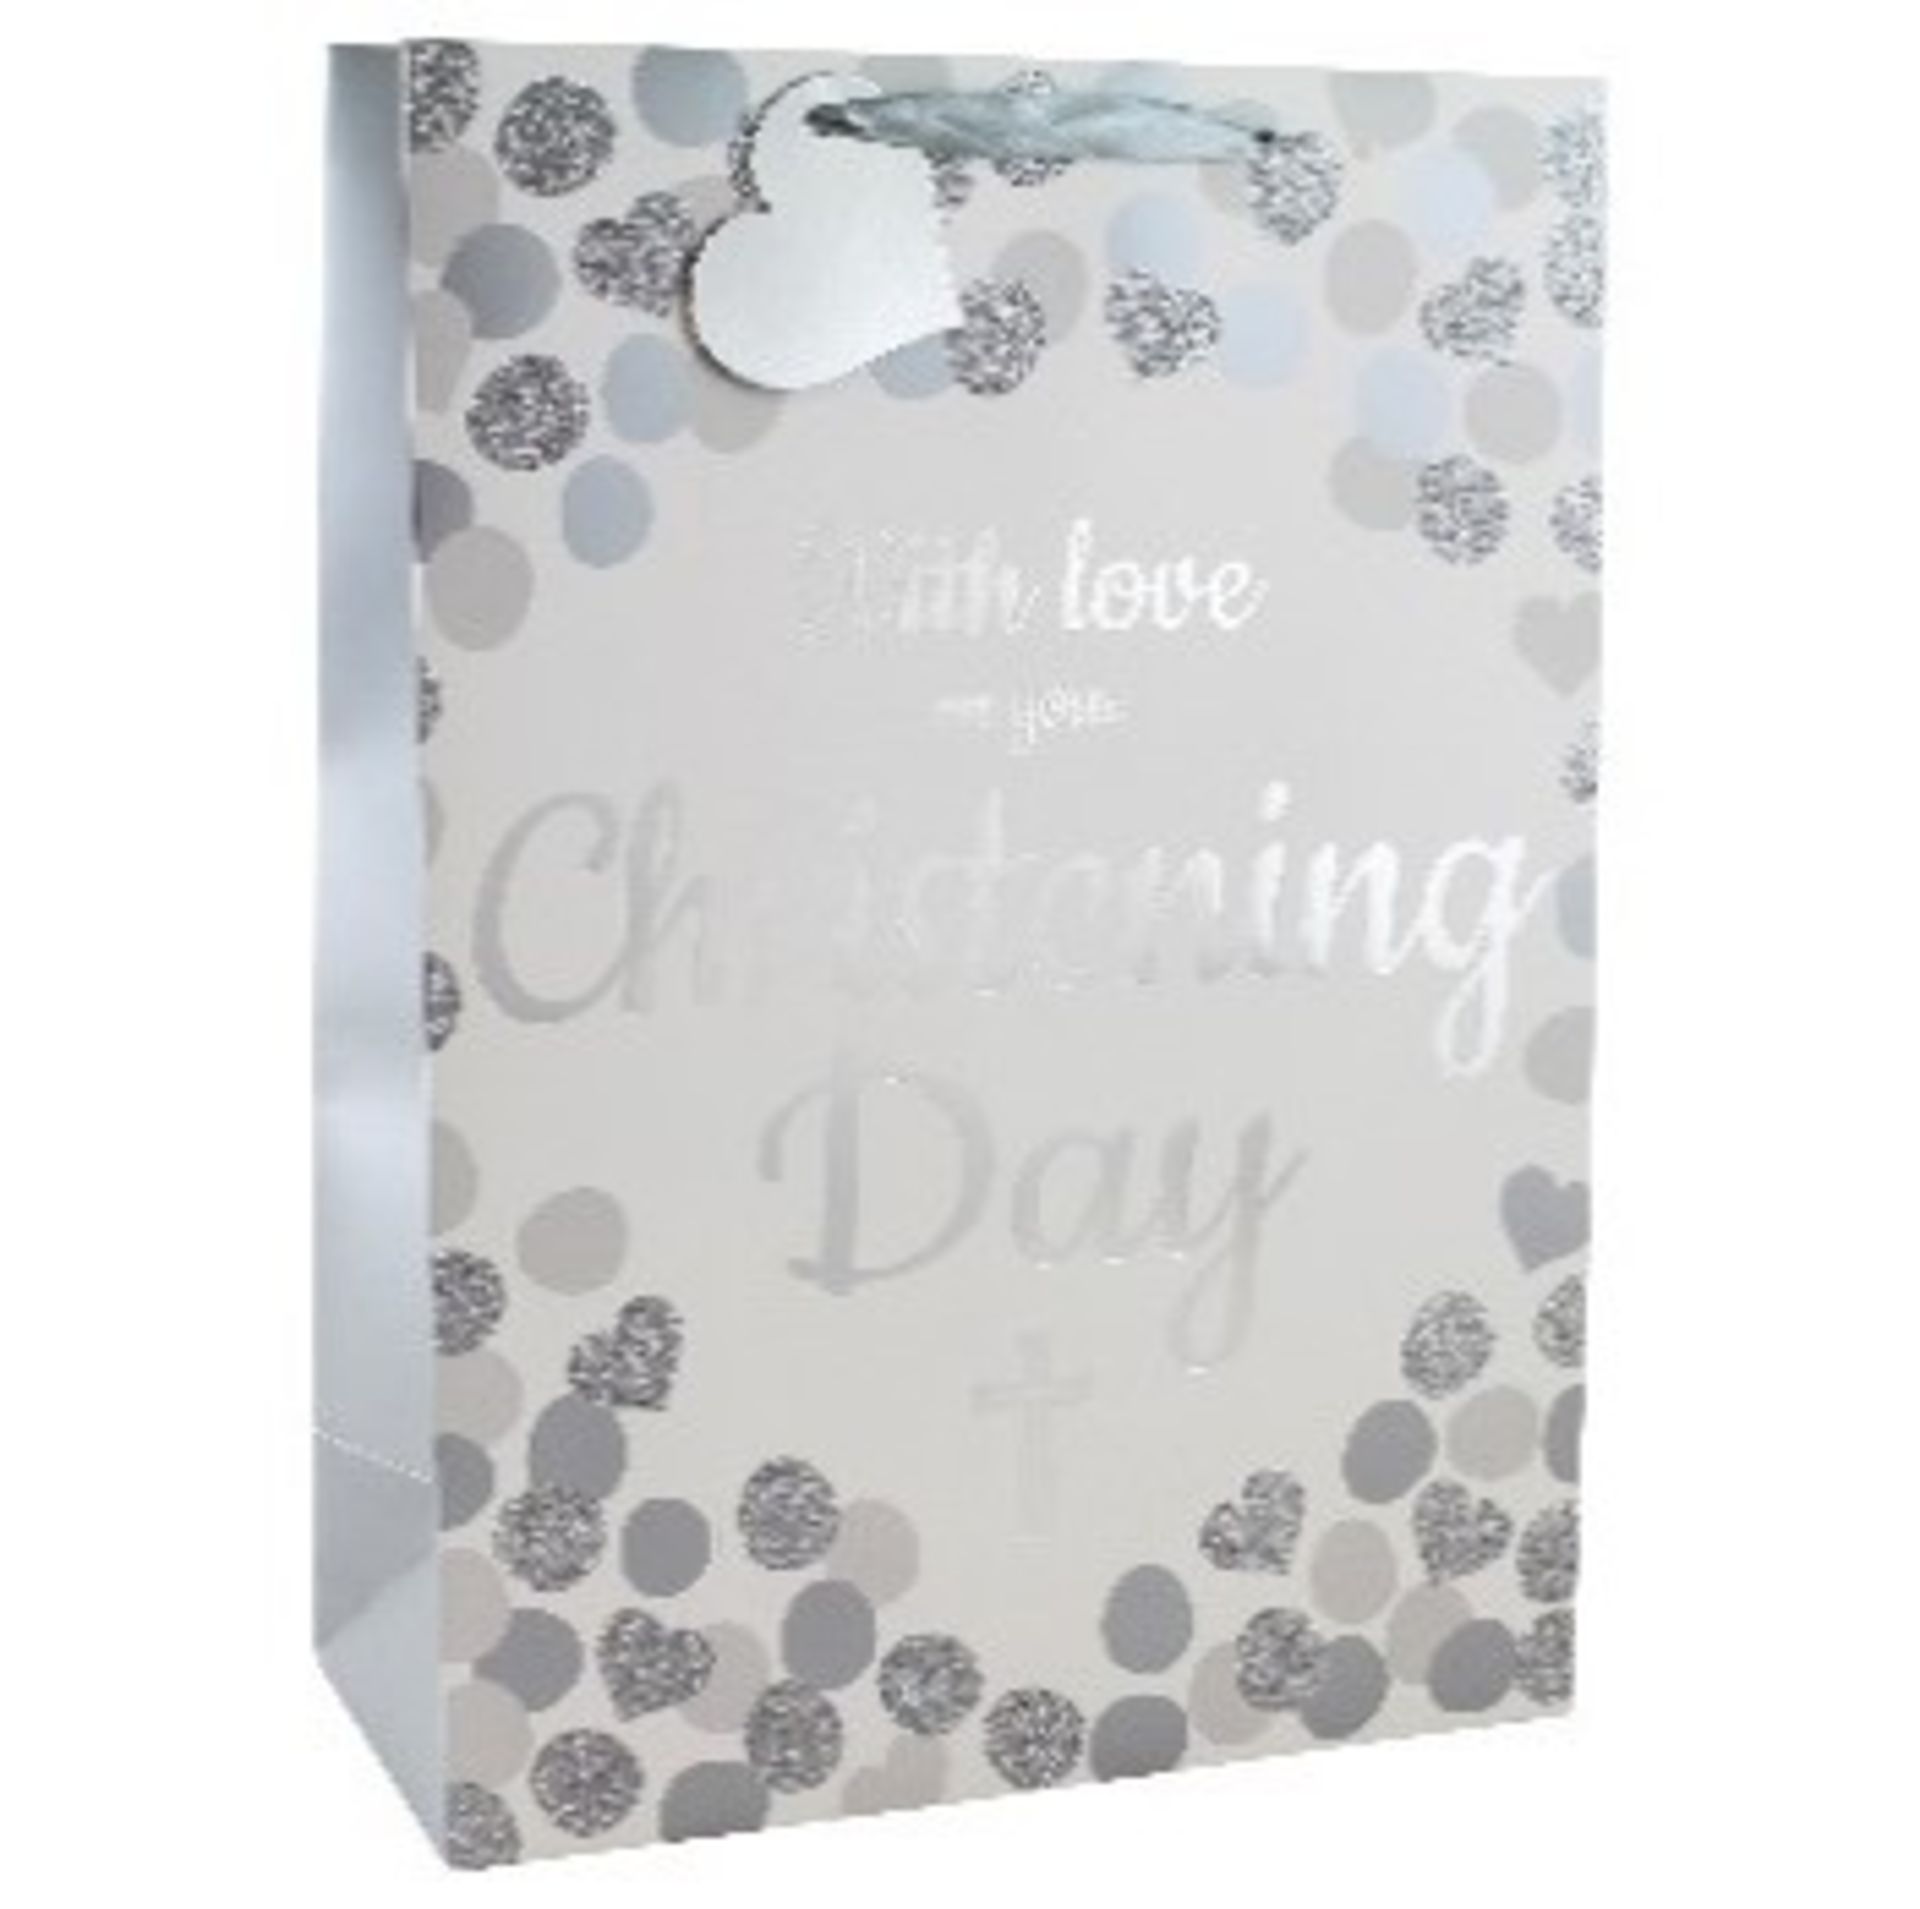 1.7M RETAIL VALUE OF ASSORTED PARTY STOCK INCLUDING CHRISTENING BAGS, CARDS, CONFETTI AND MORE - Image 2 of 16